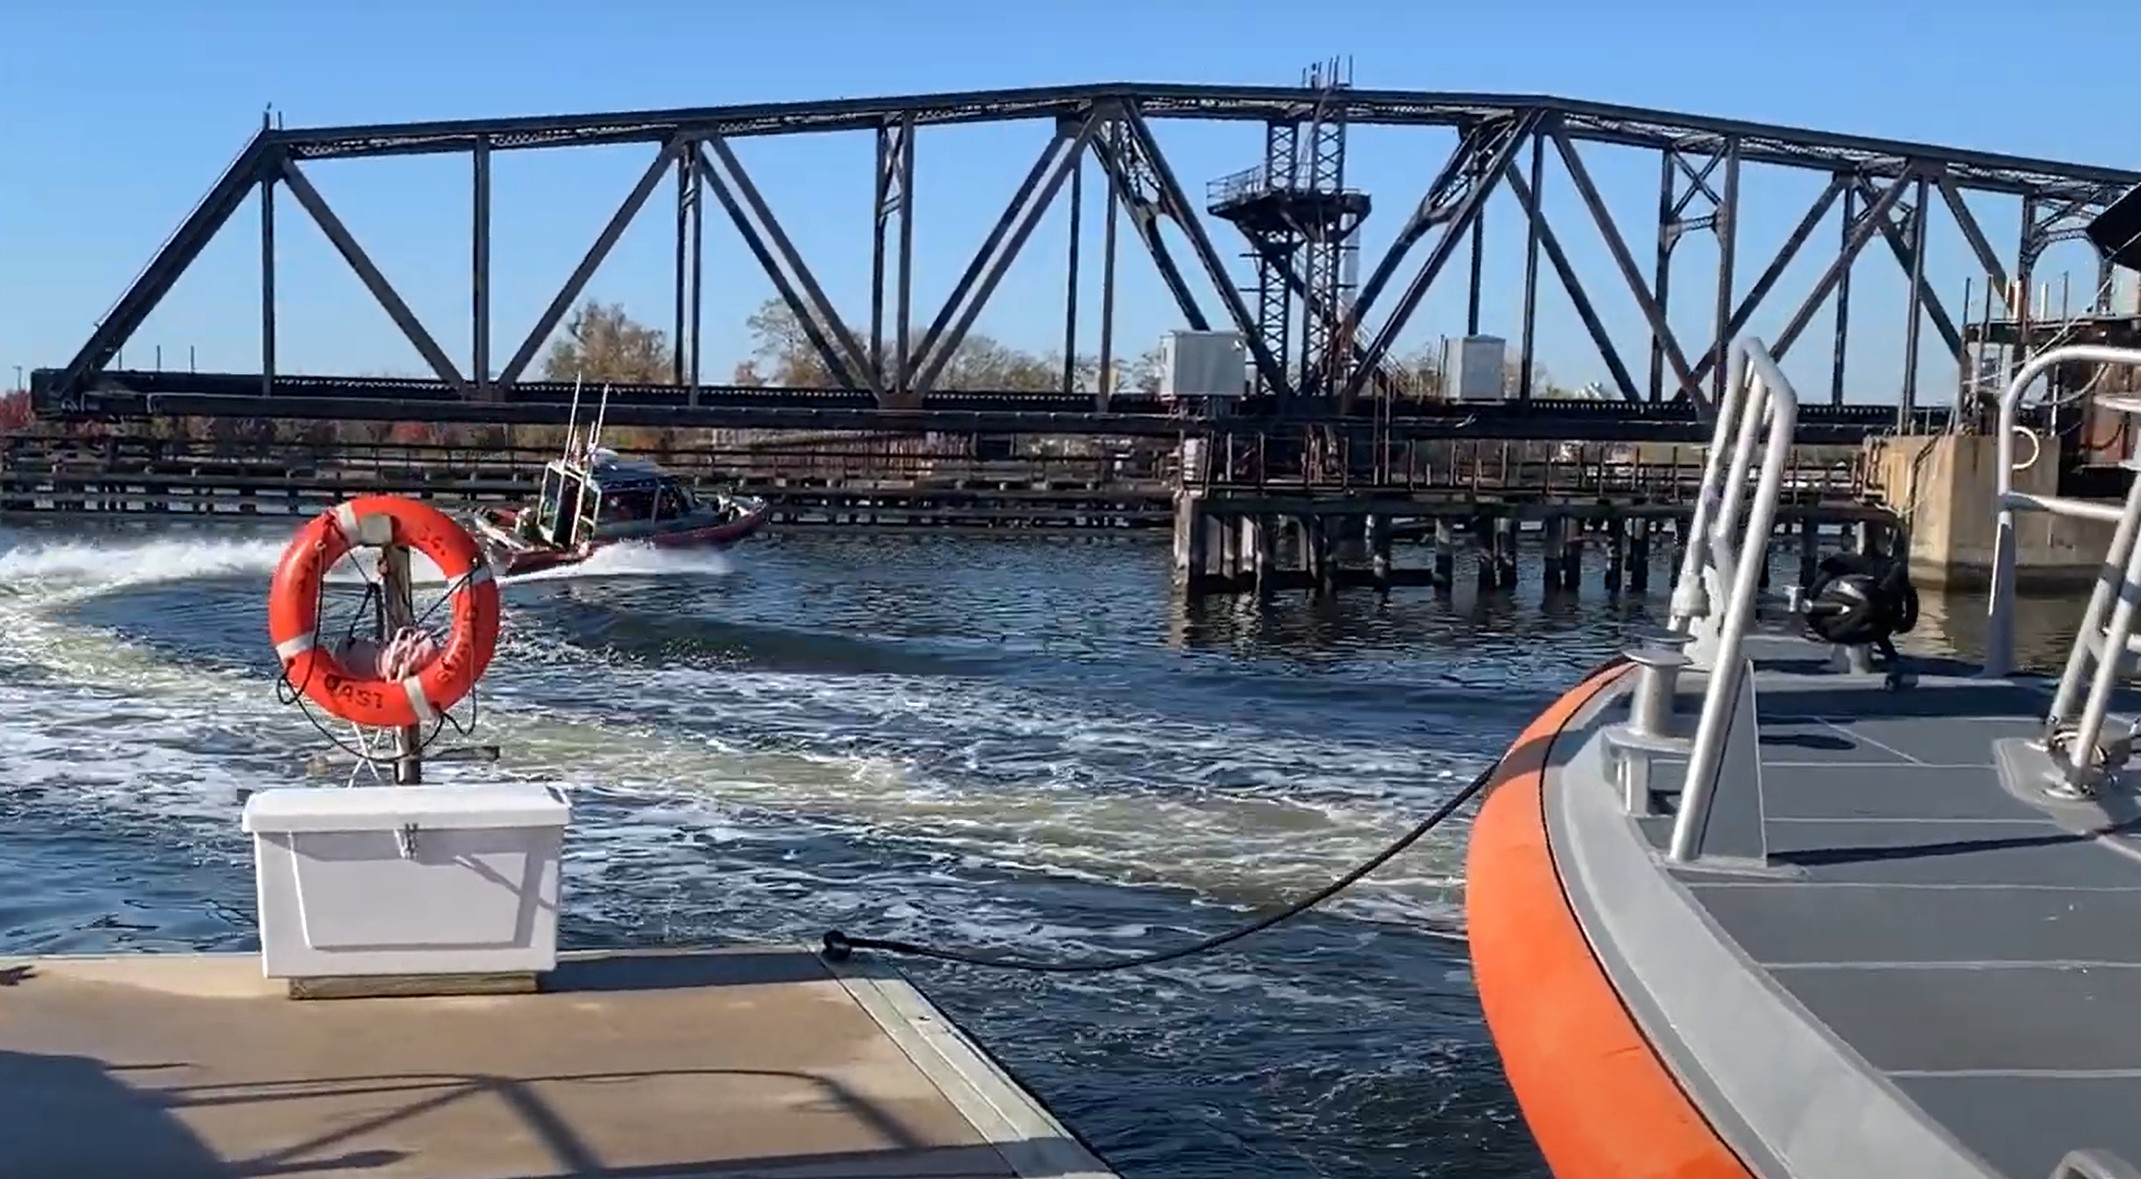 VIDEO: USCG Warns Boaters to Dress for Winter